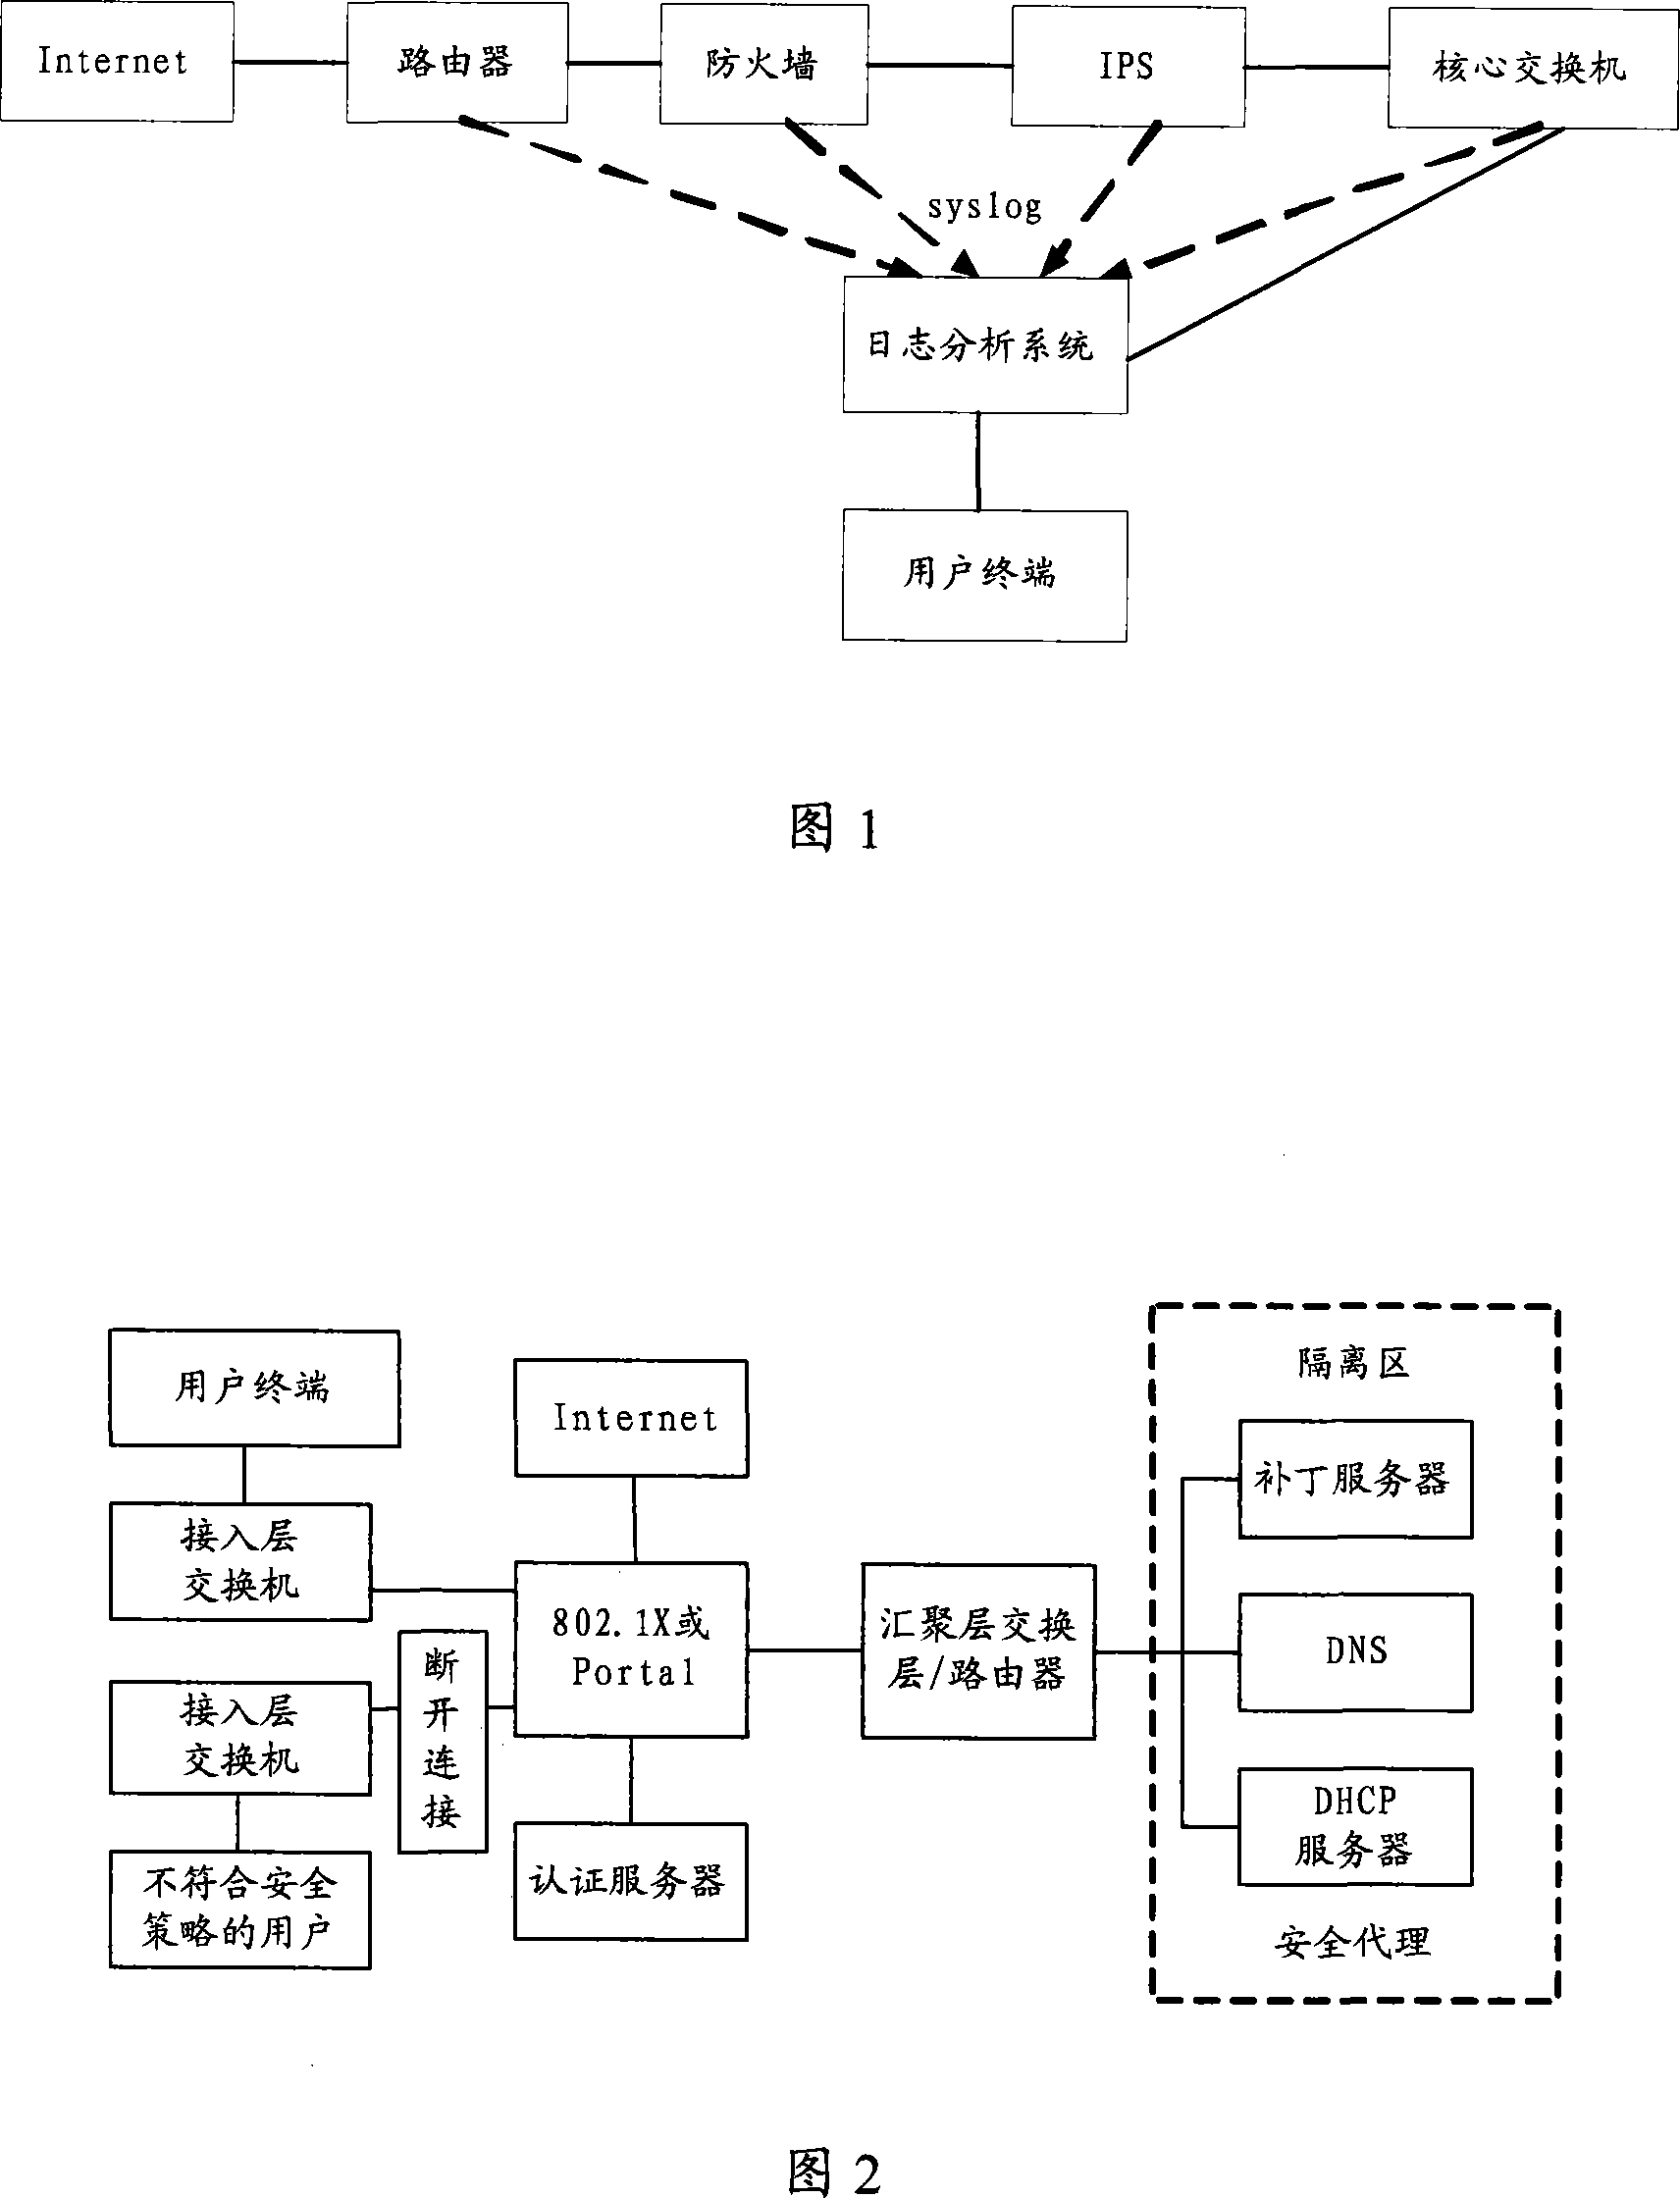 A device and method for secure information joint processing